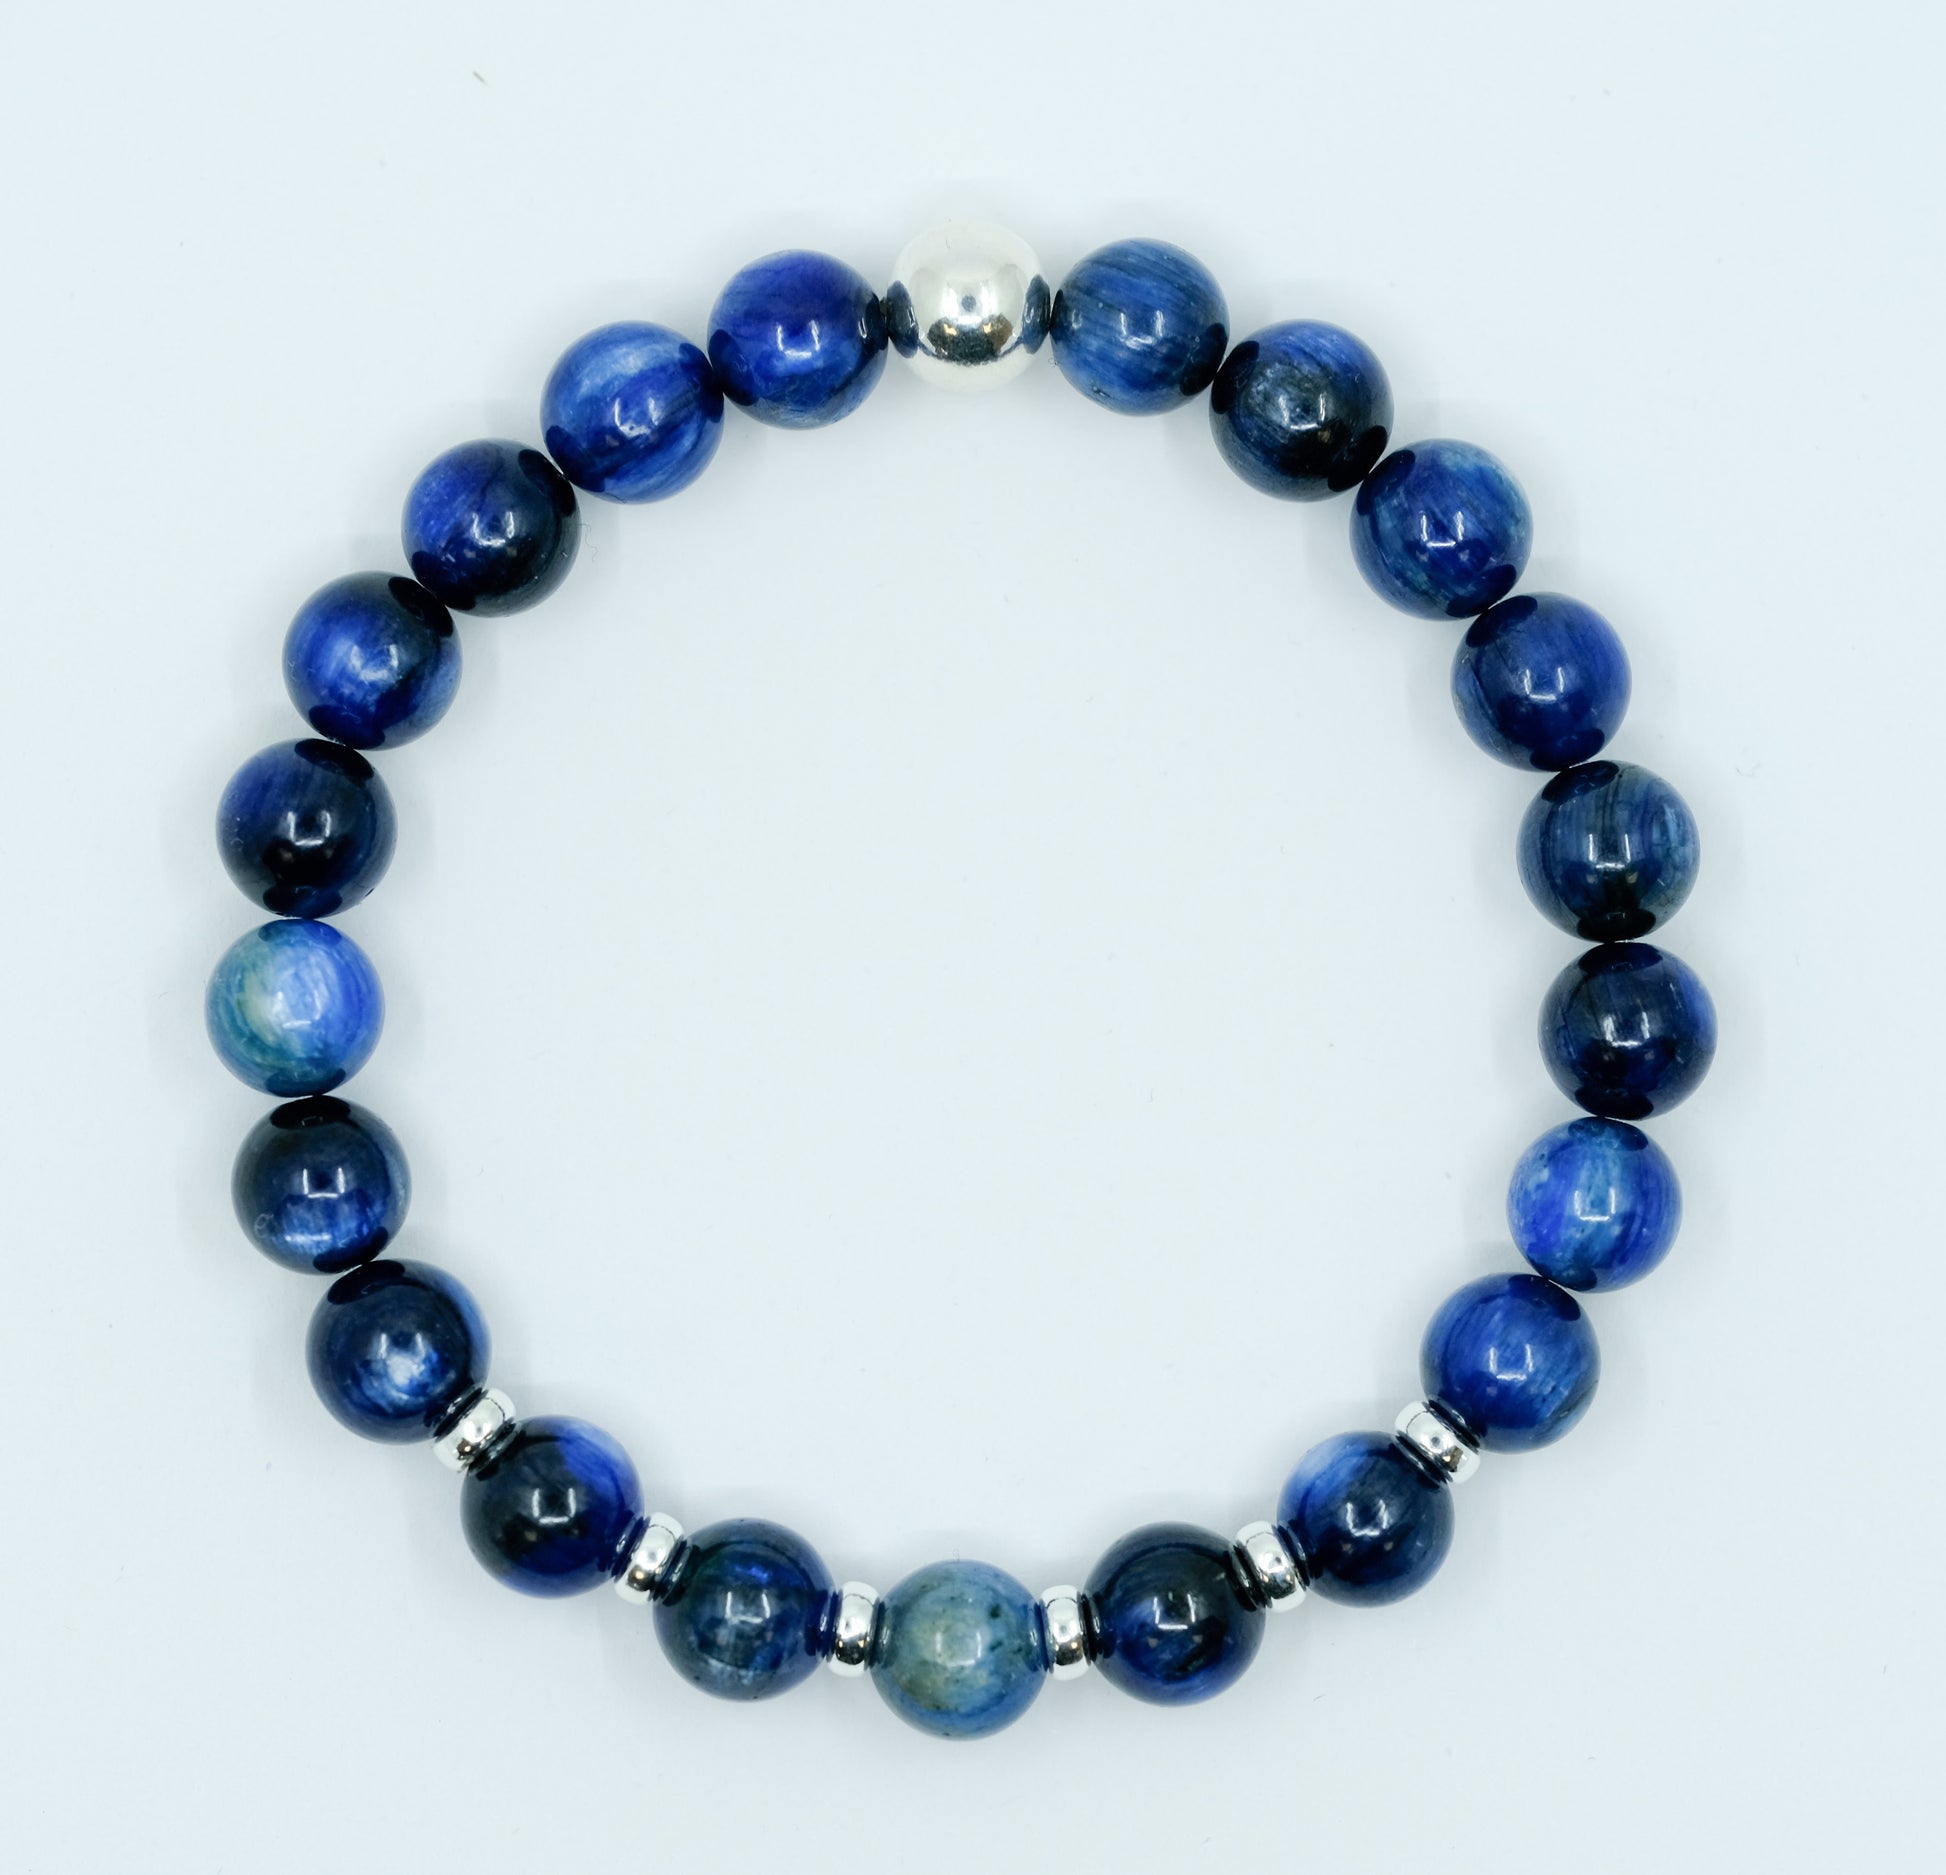 Kyanite gemstone bracelet with Silver accents from above